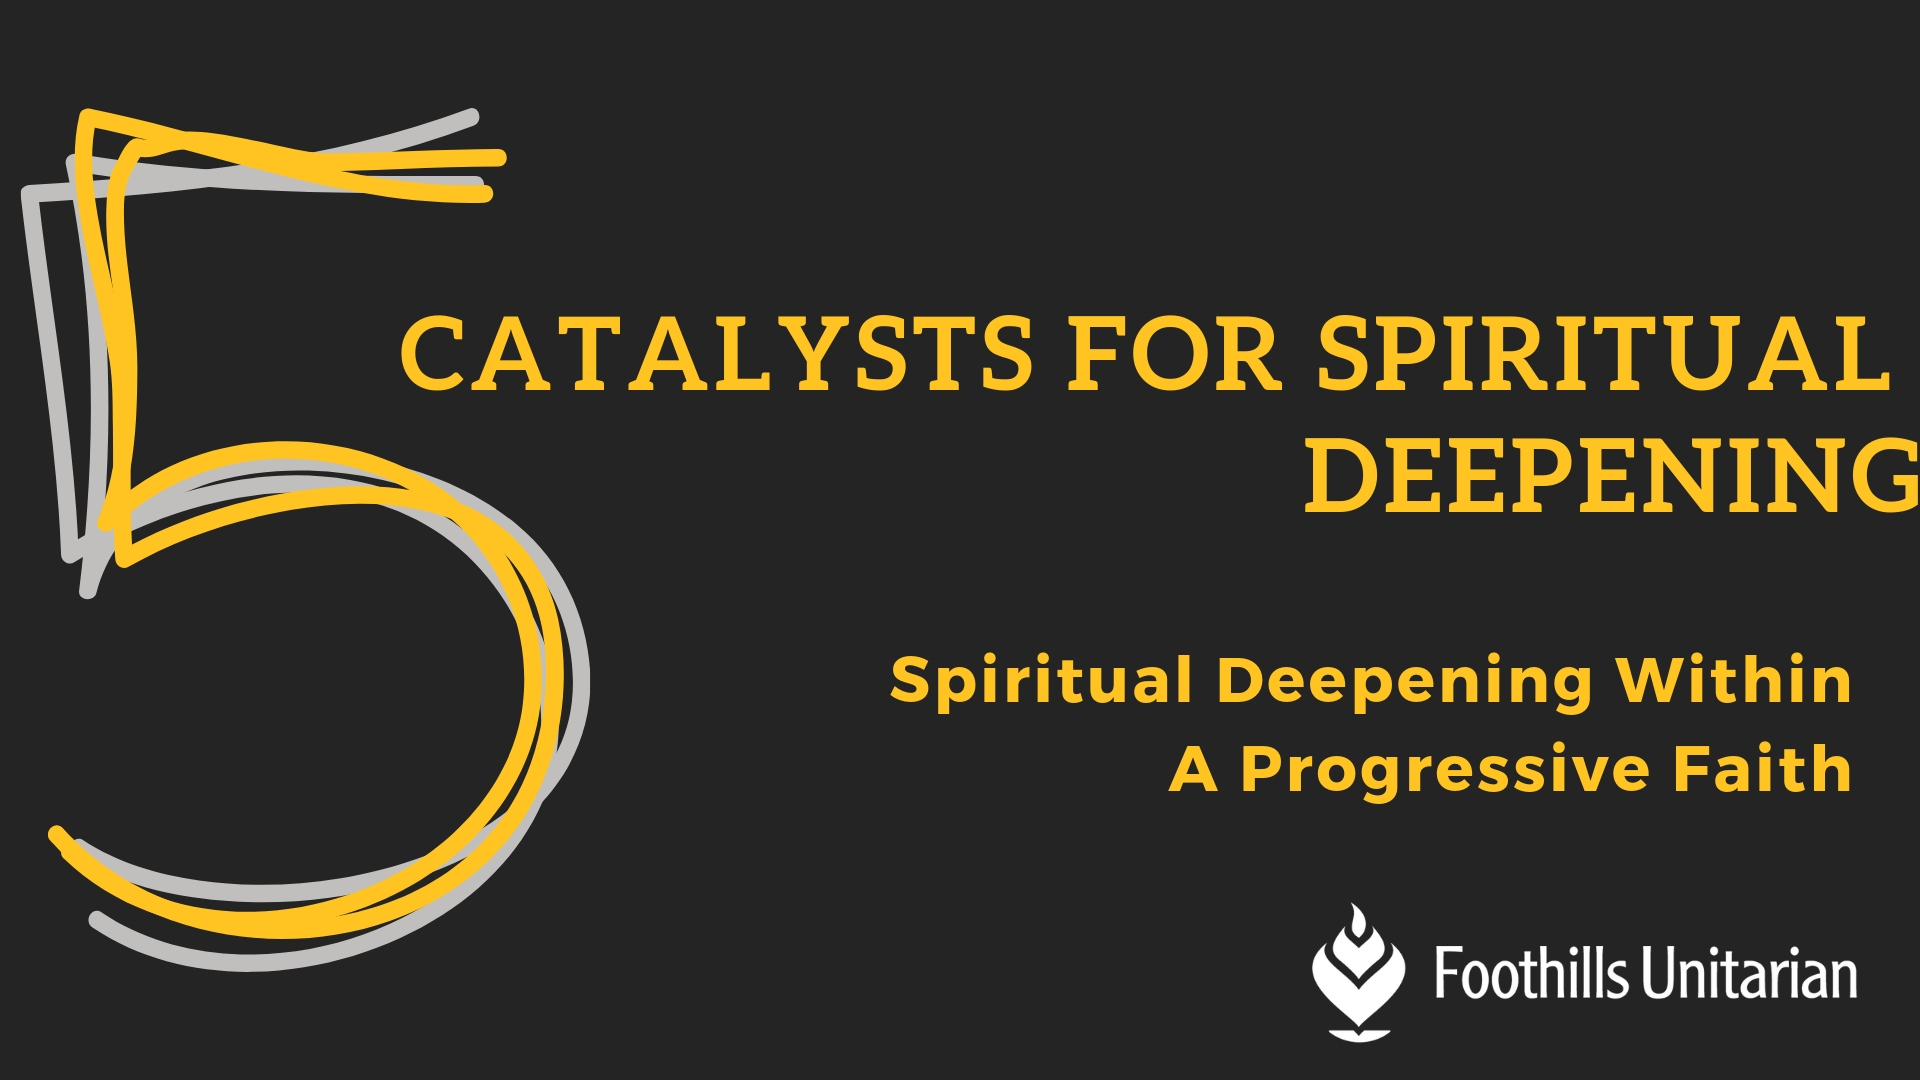 5 Catalysts for Spiritual Deepening